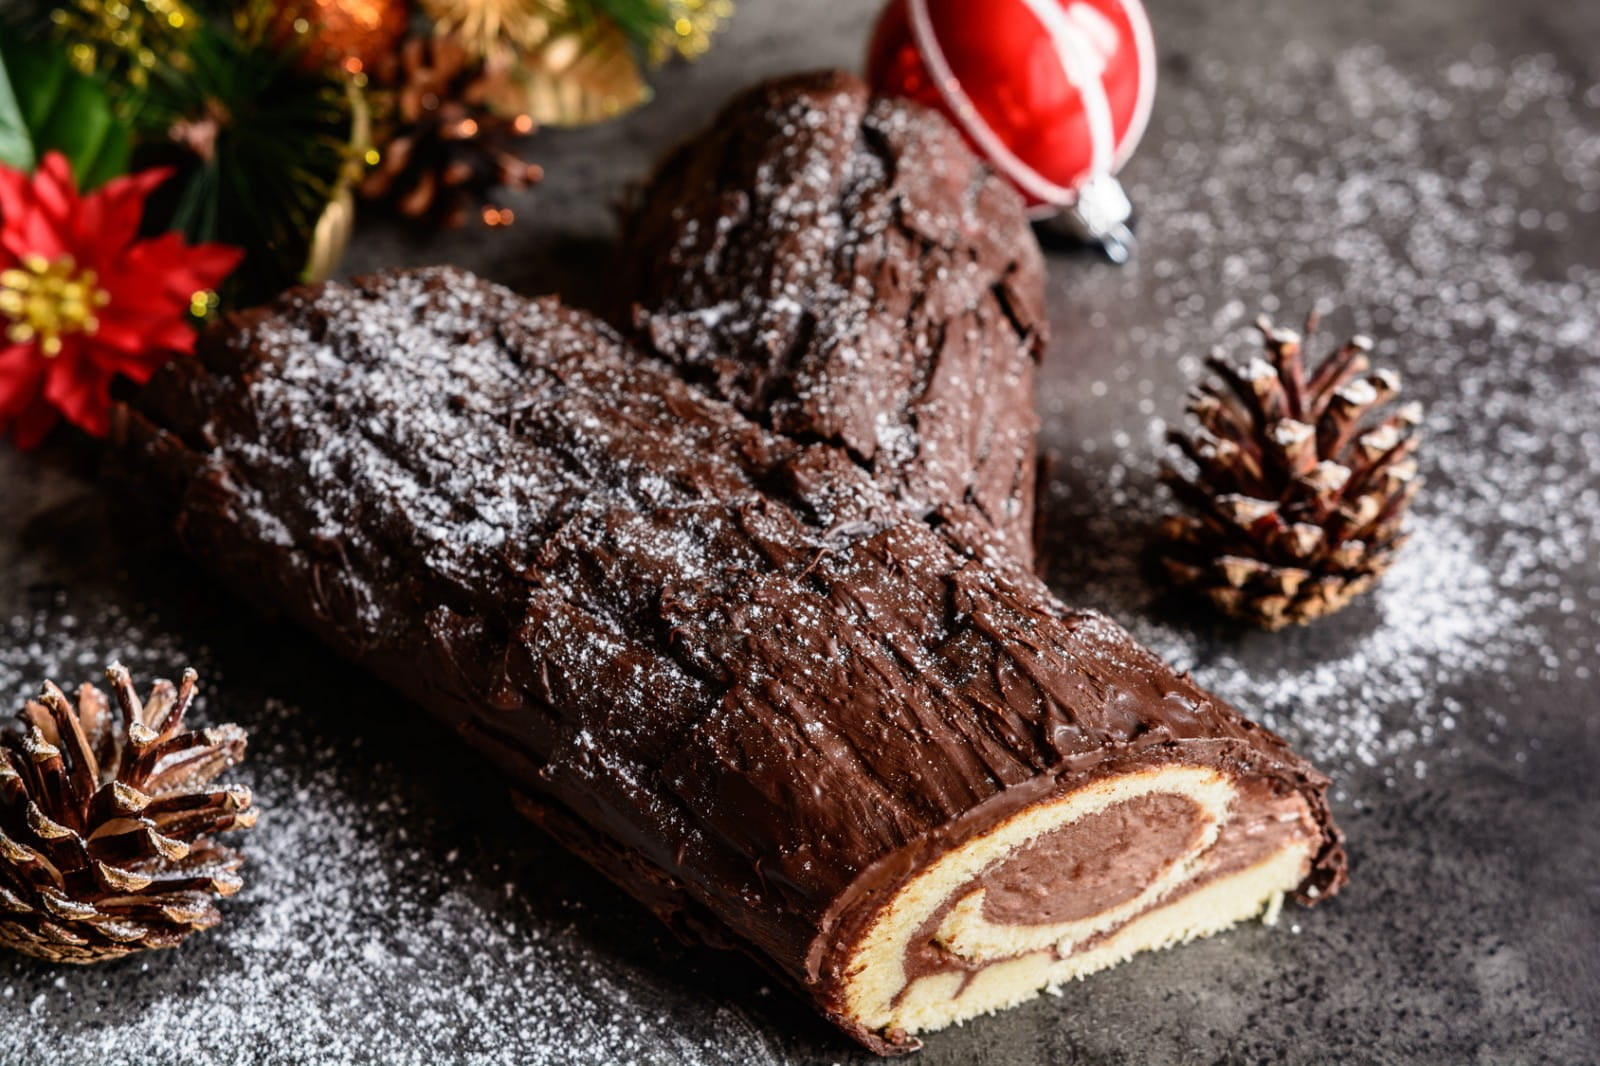 The best wine and liqueur pairings for a chocolate yule log